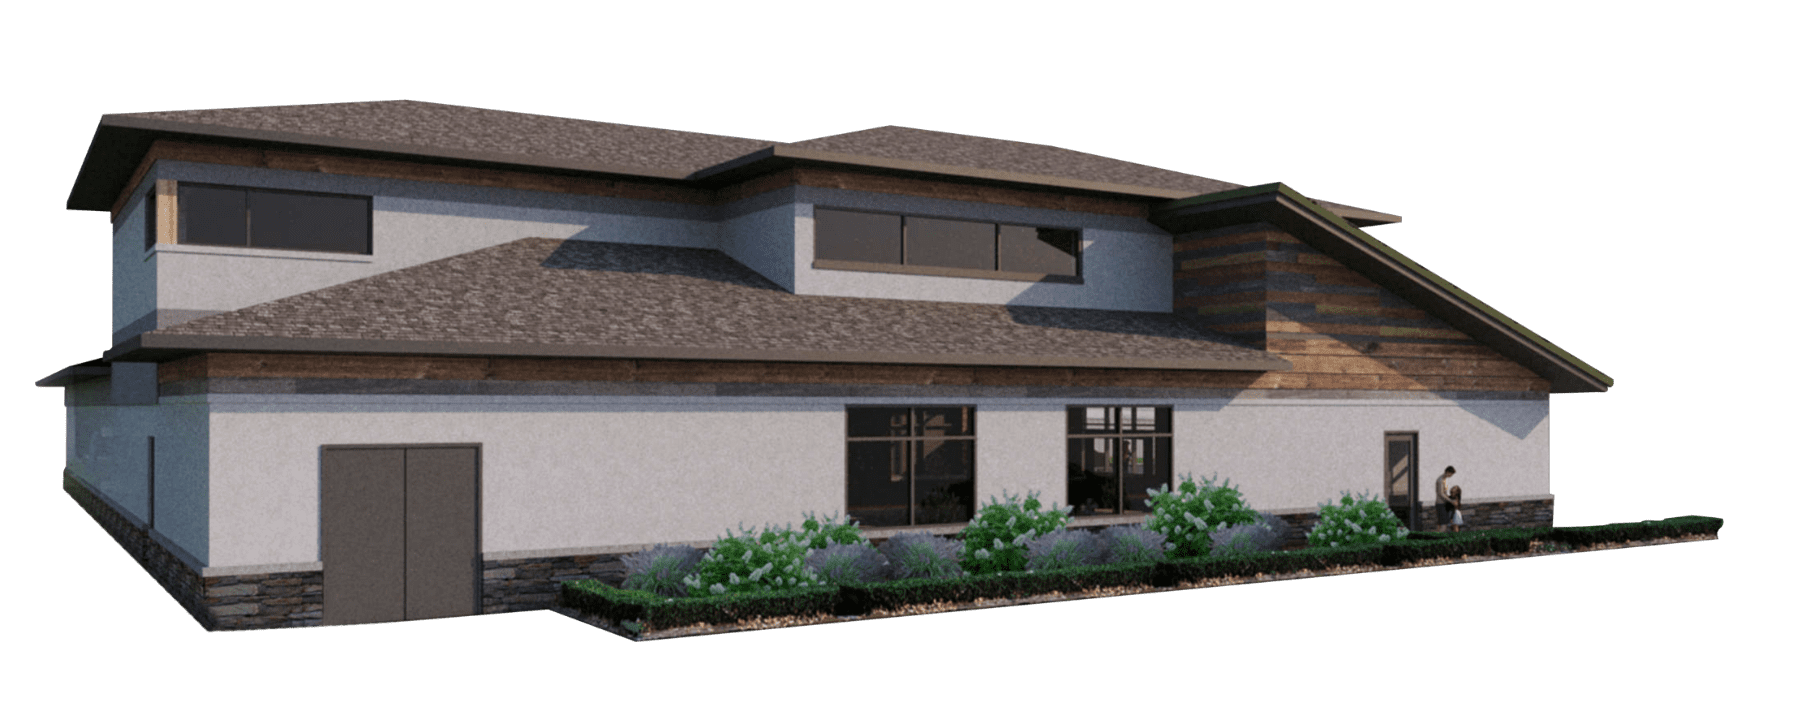 Rendering of a residential home